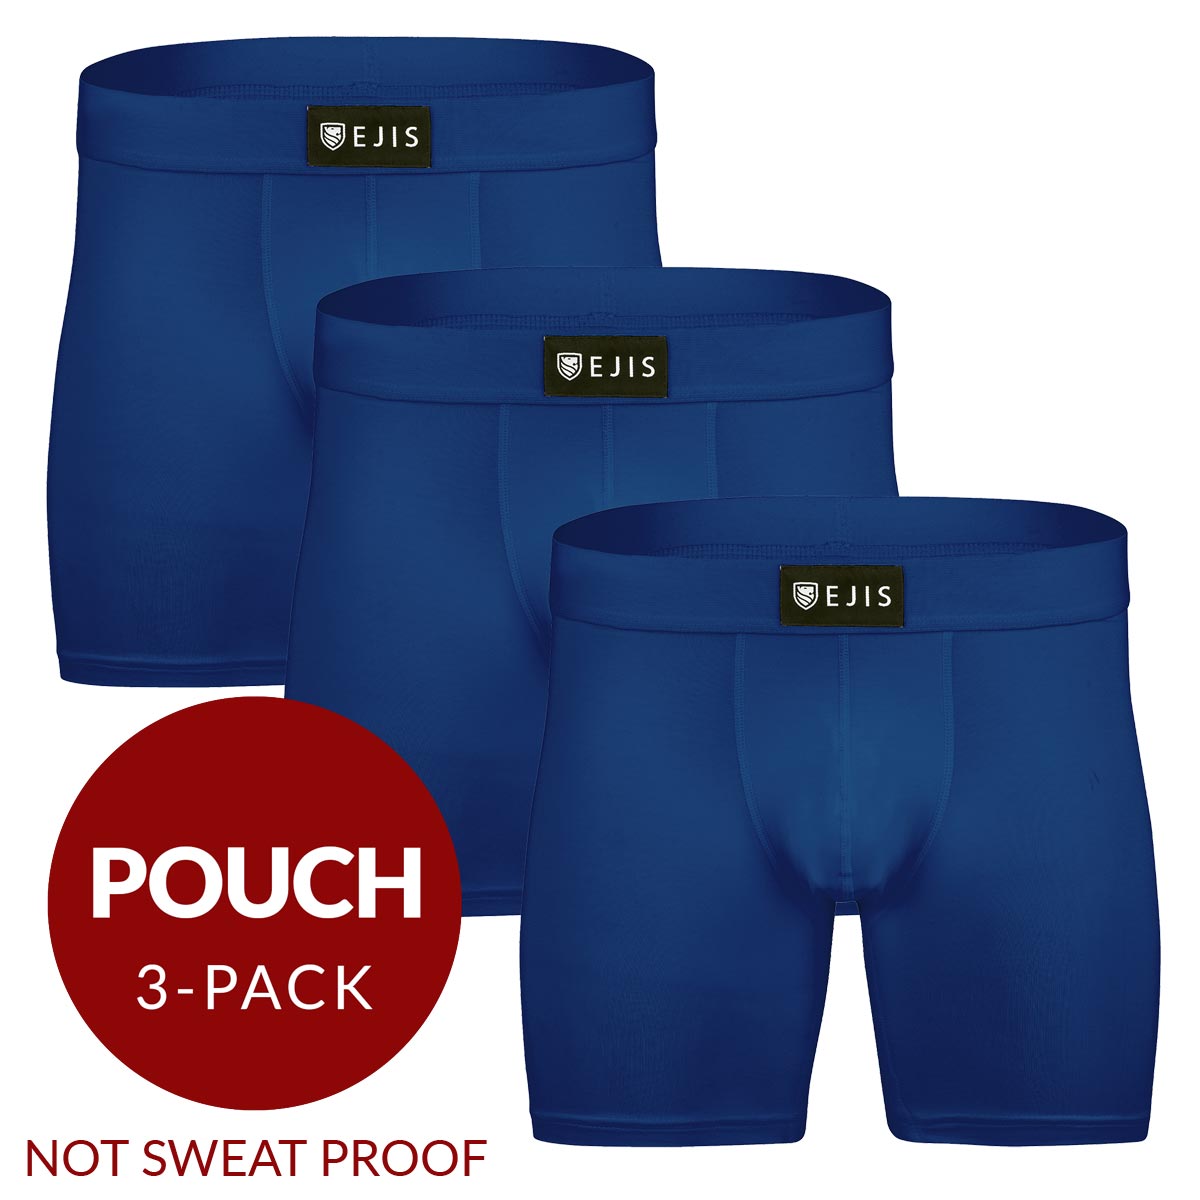 Ejis Sweat Proof Men's Boxer Briefs Micro Modal with Odor Fighting